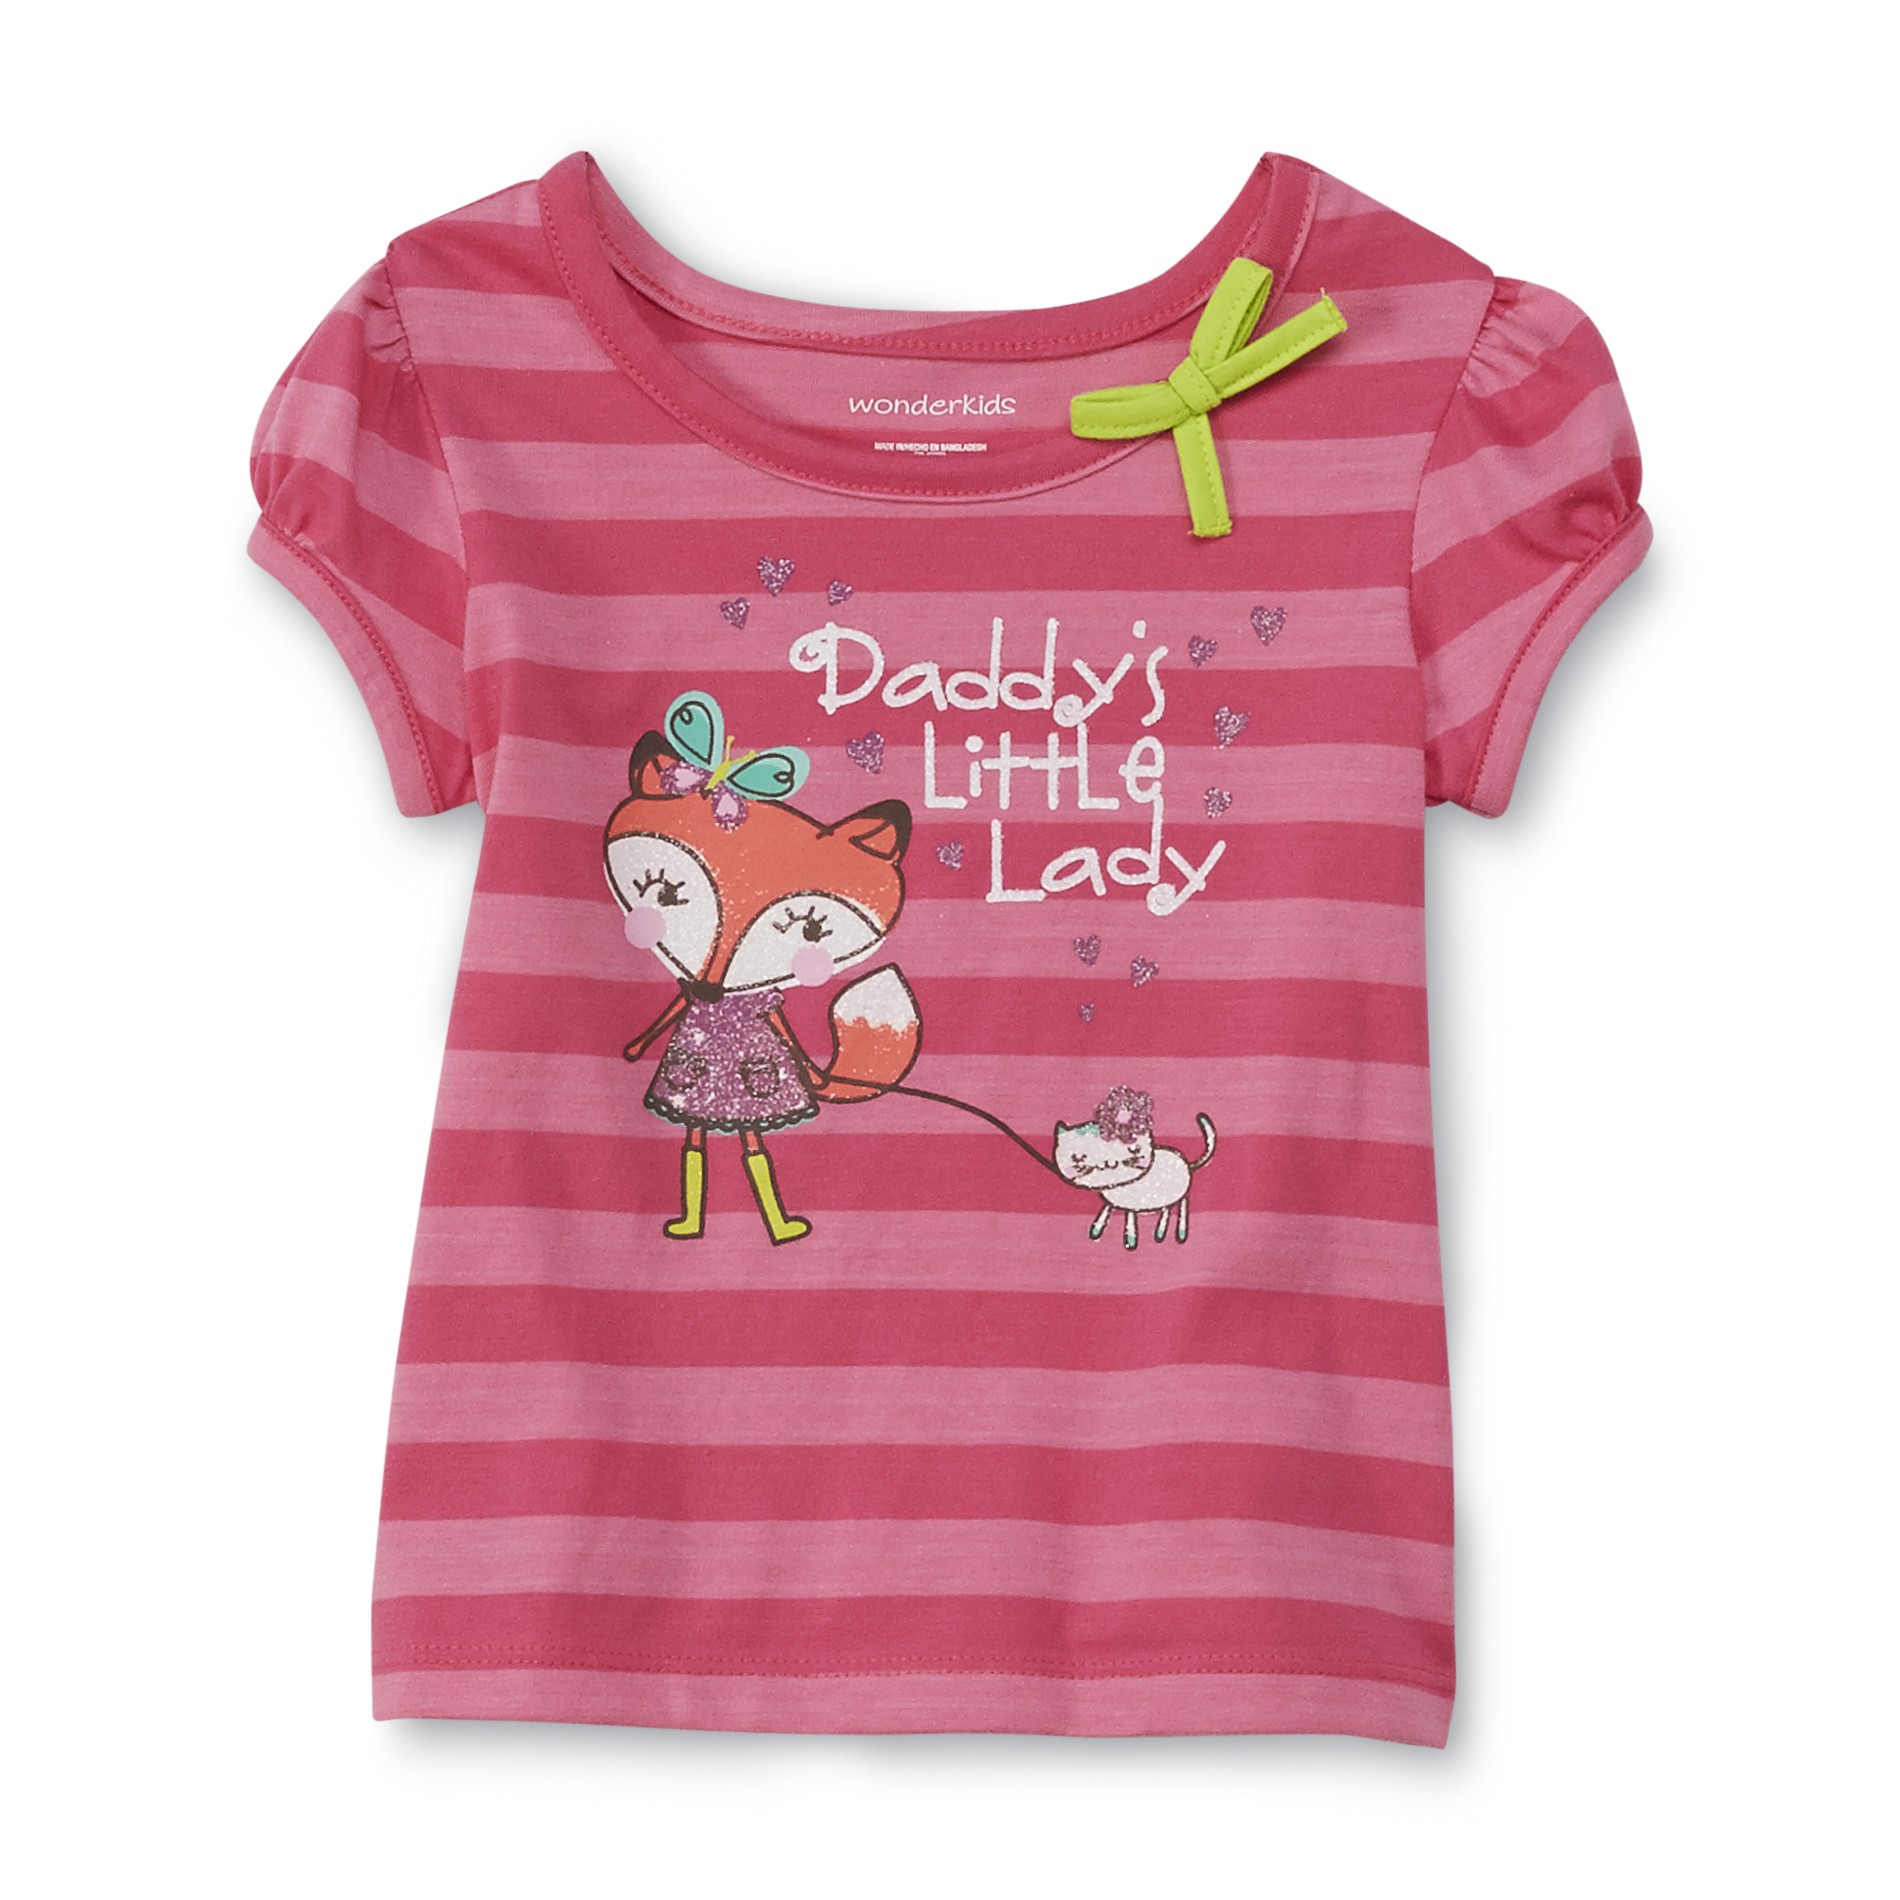 WonderKids Infant & Toddler Girl's Graphic T-Shirt - Daddy's Little Lady